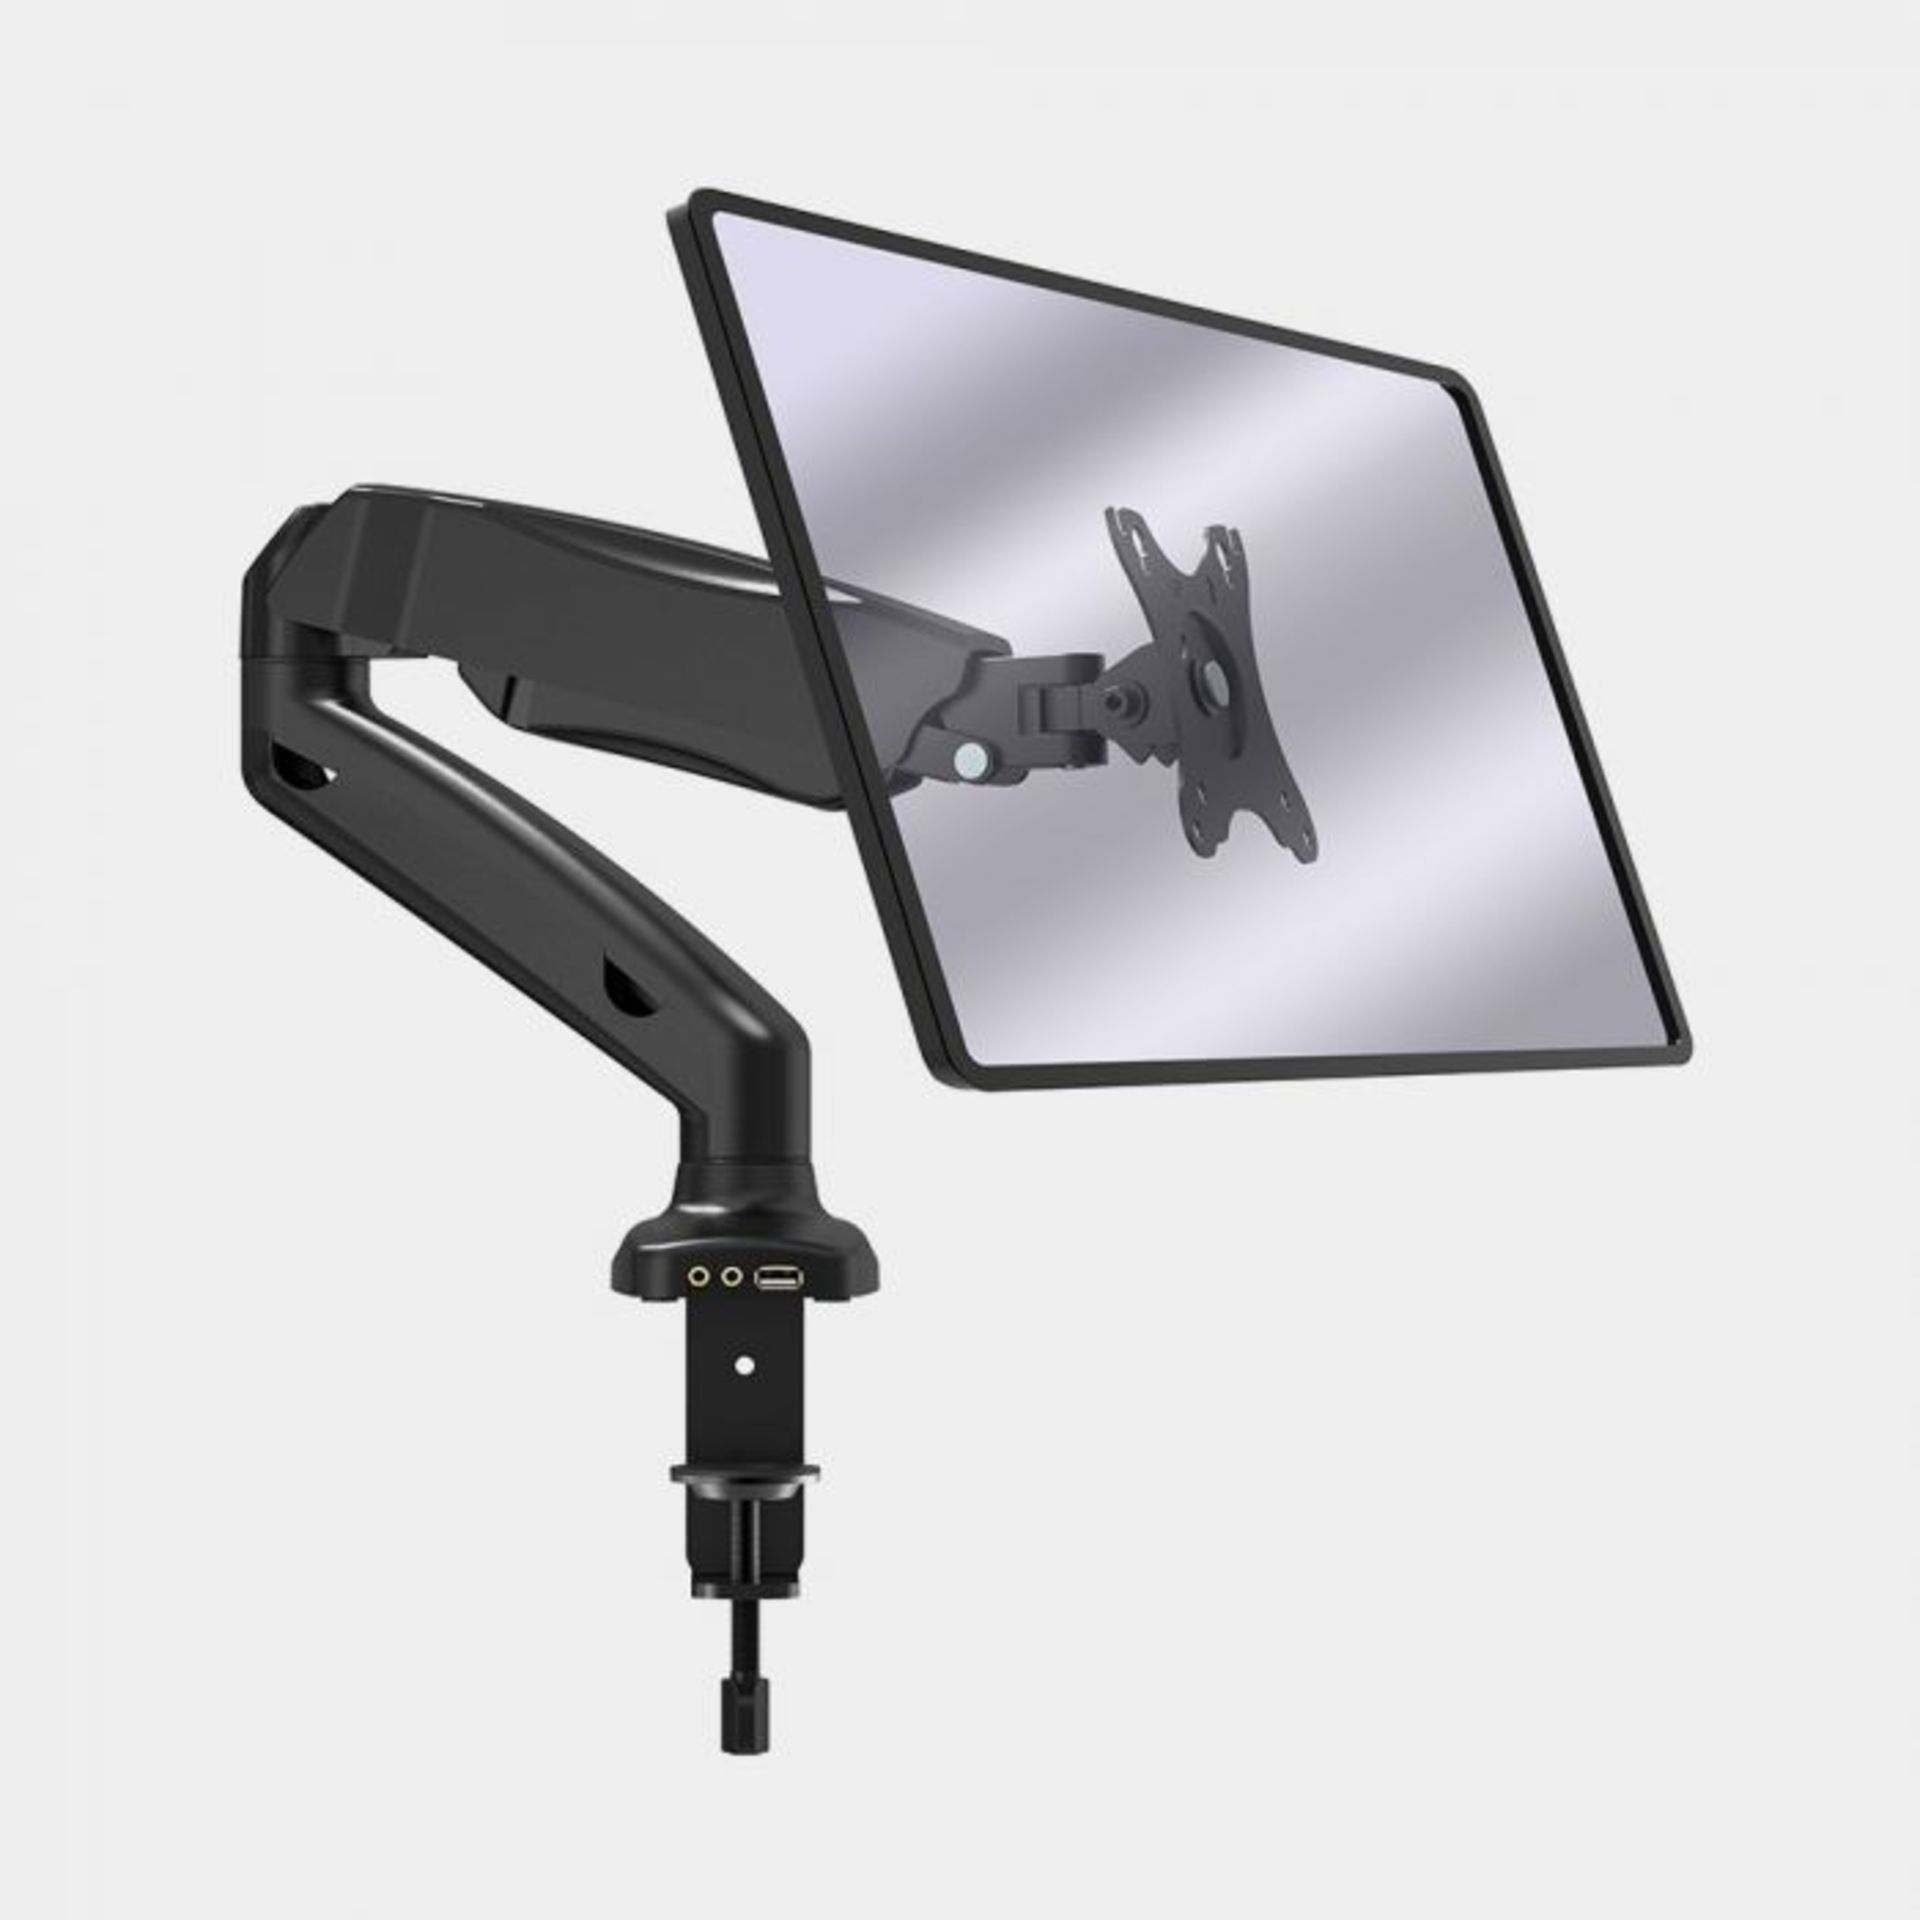 Single Arm Gas Mount With Clamp. Free up valuable desk space and achieve the perfect viewing